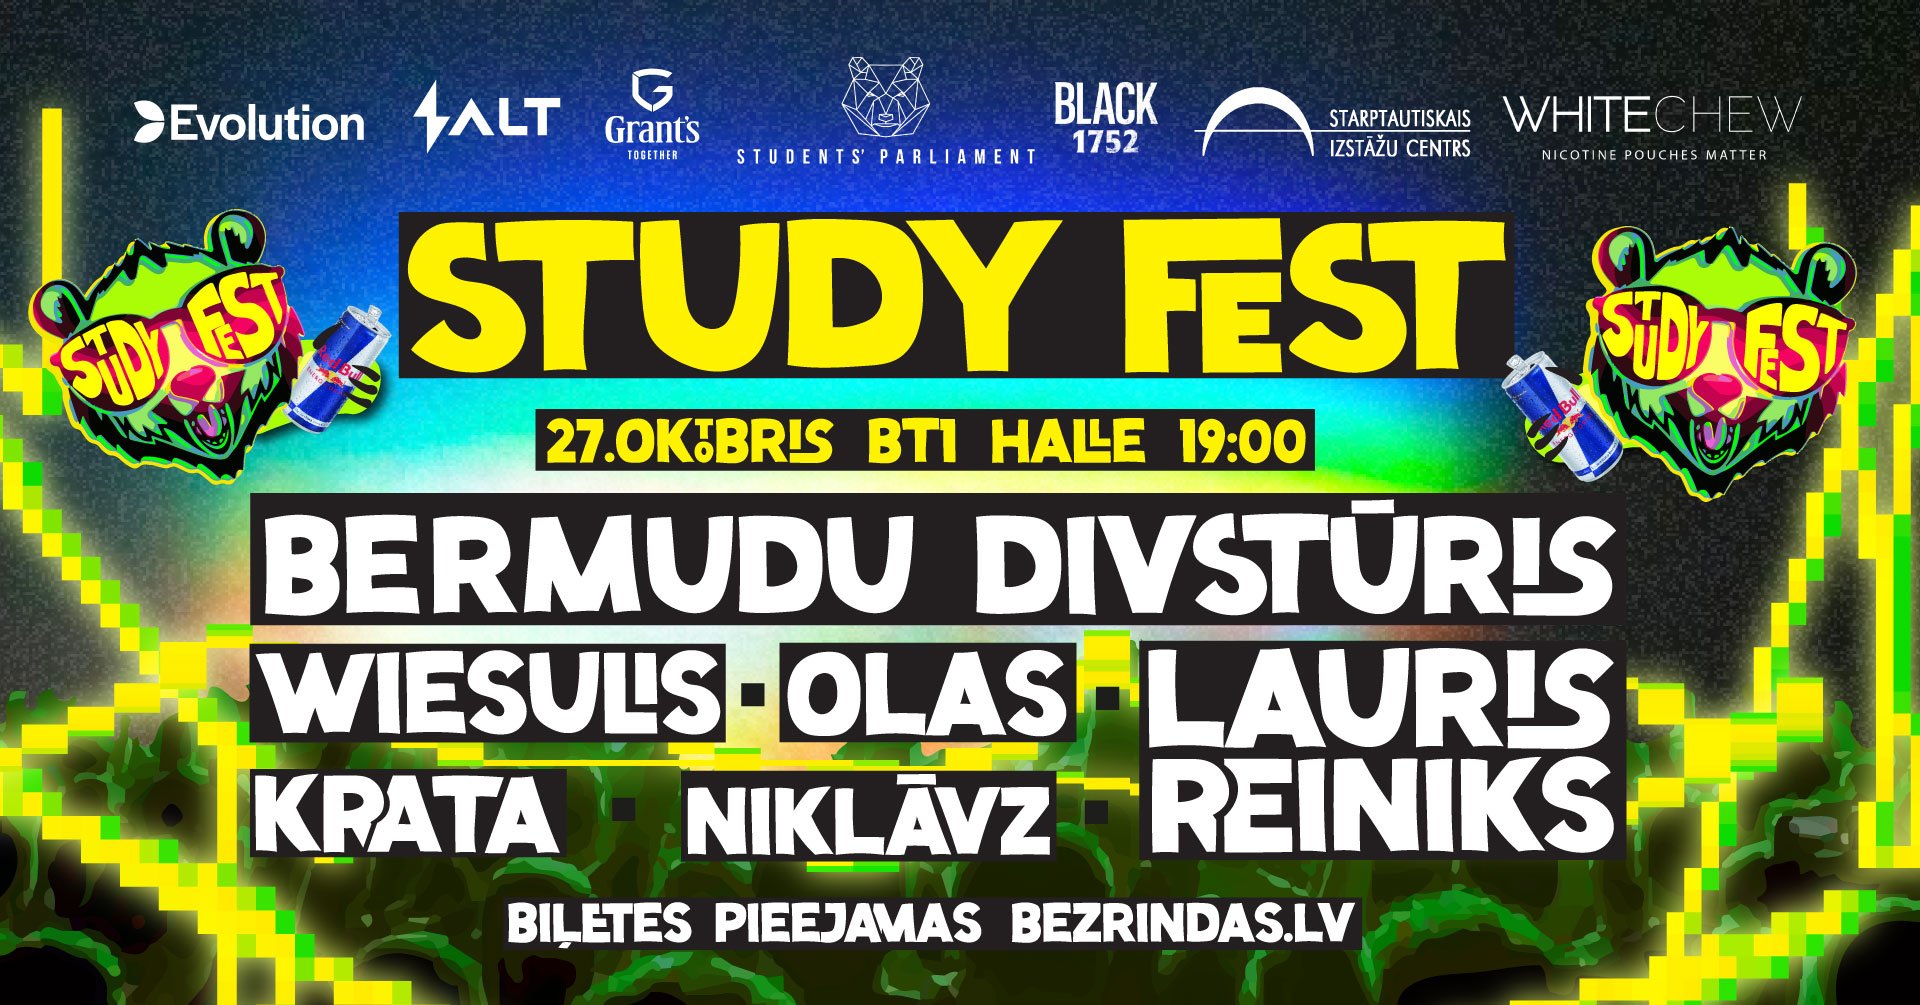 The Annual RTU Student Ball Transforms into «Studyfest 2023», an Ambitious Student Friendship Festival